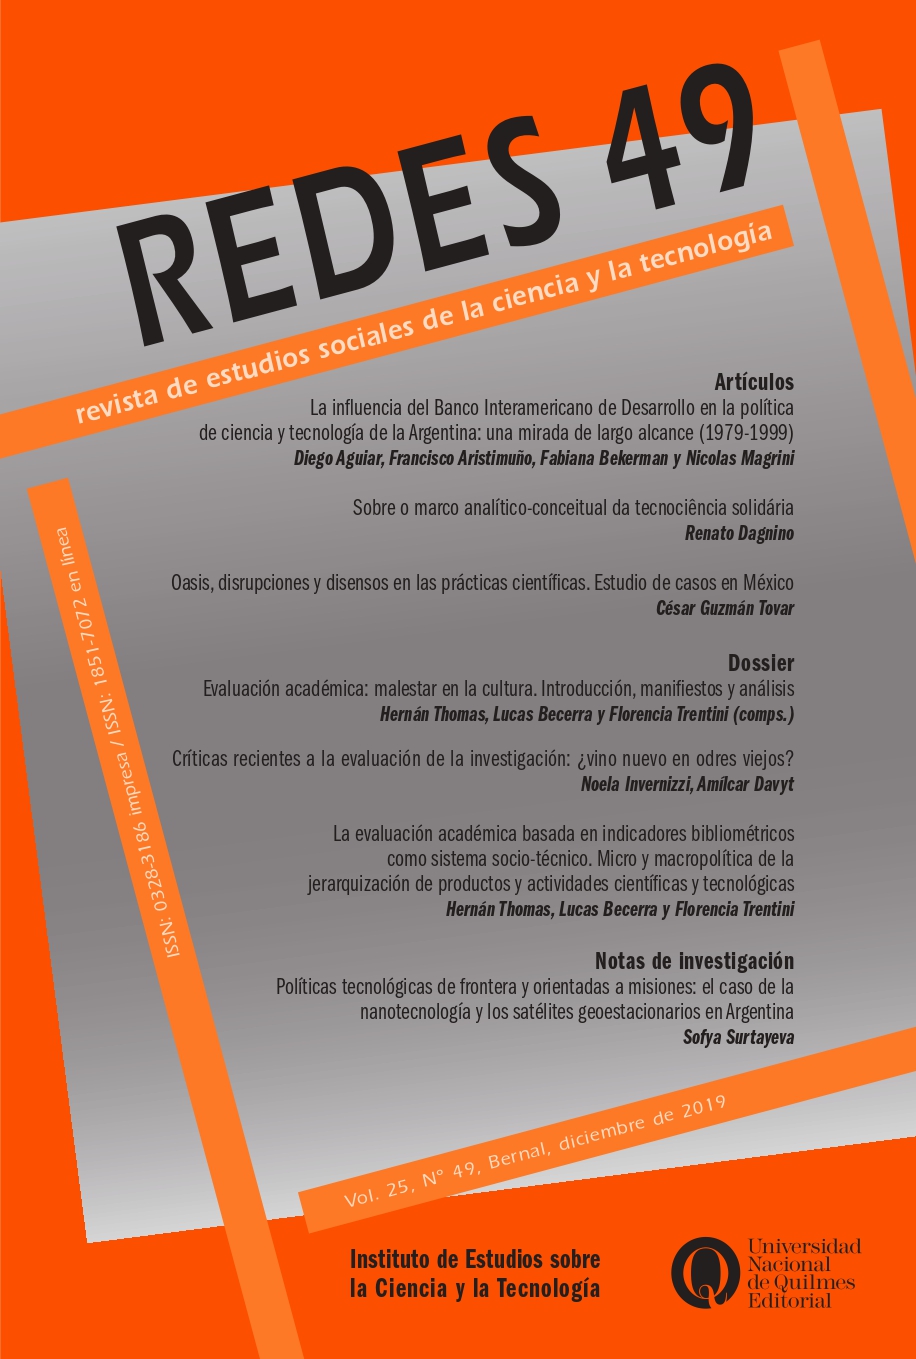 					View Vol. 25 No. 49 (2019): REDES N° 49
				